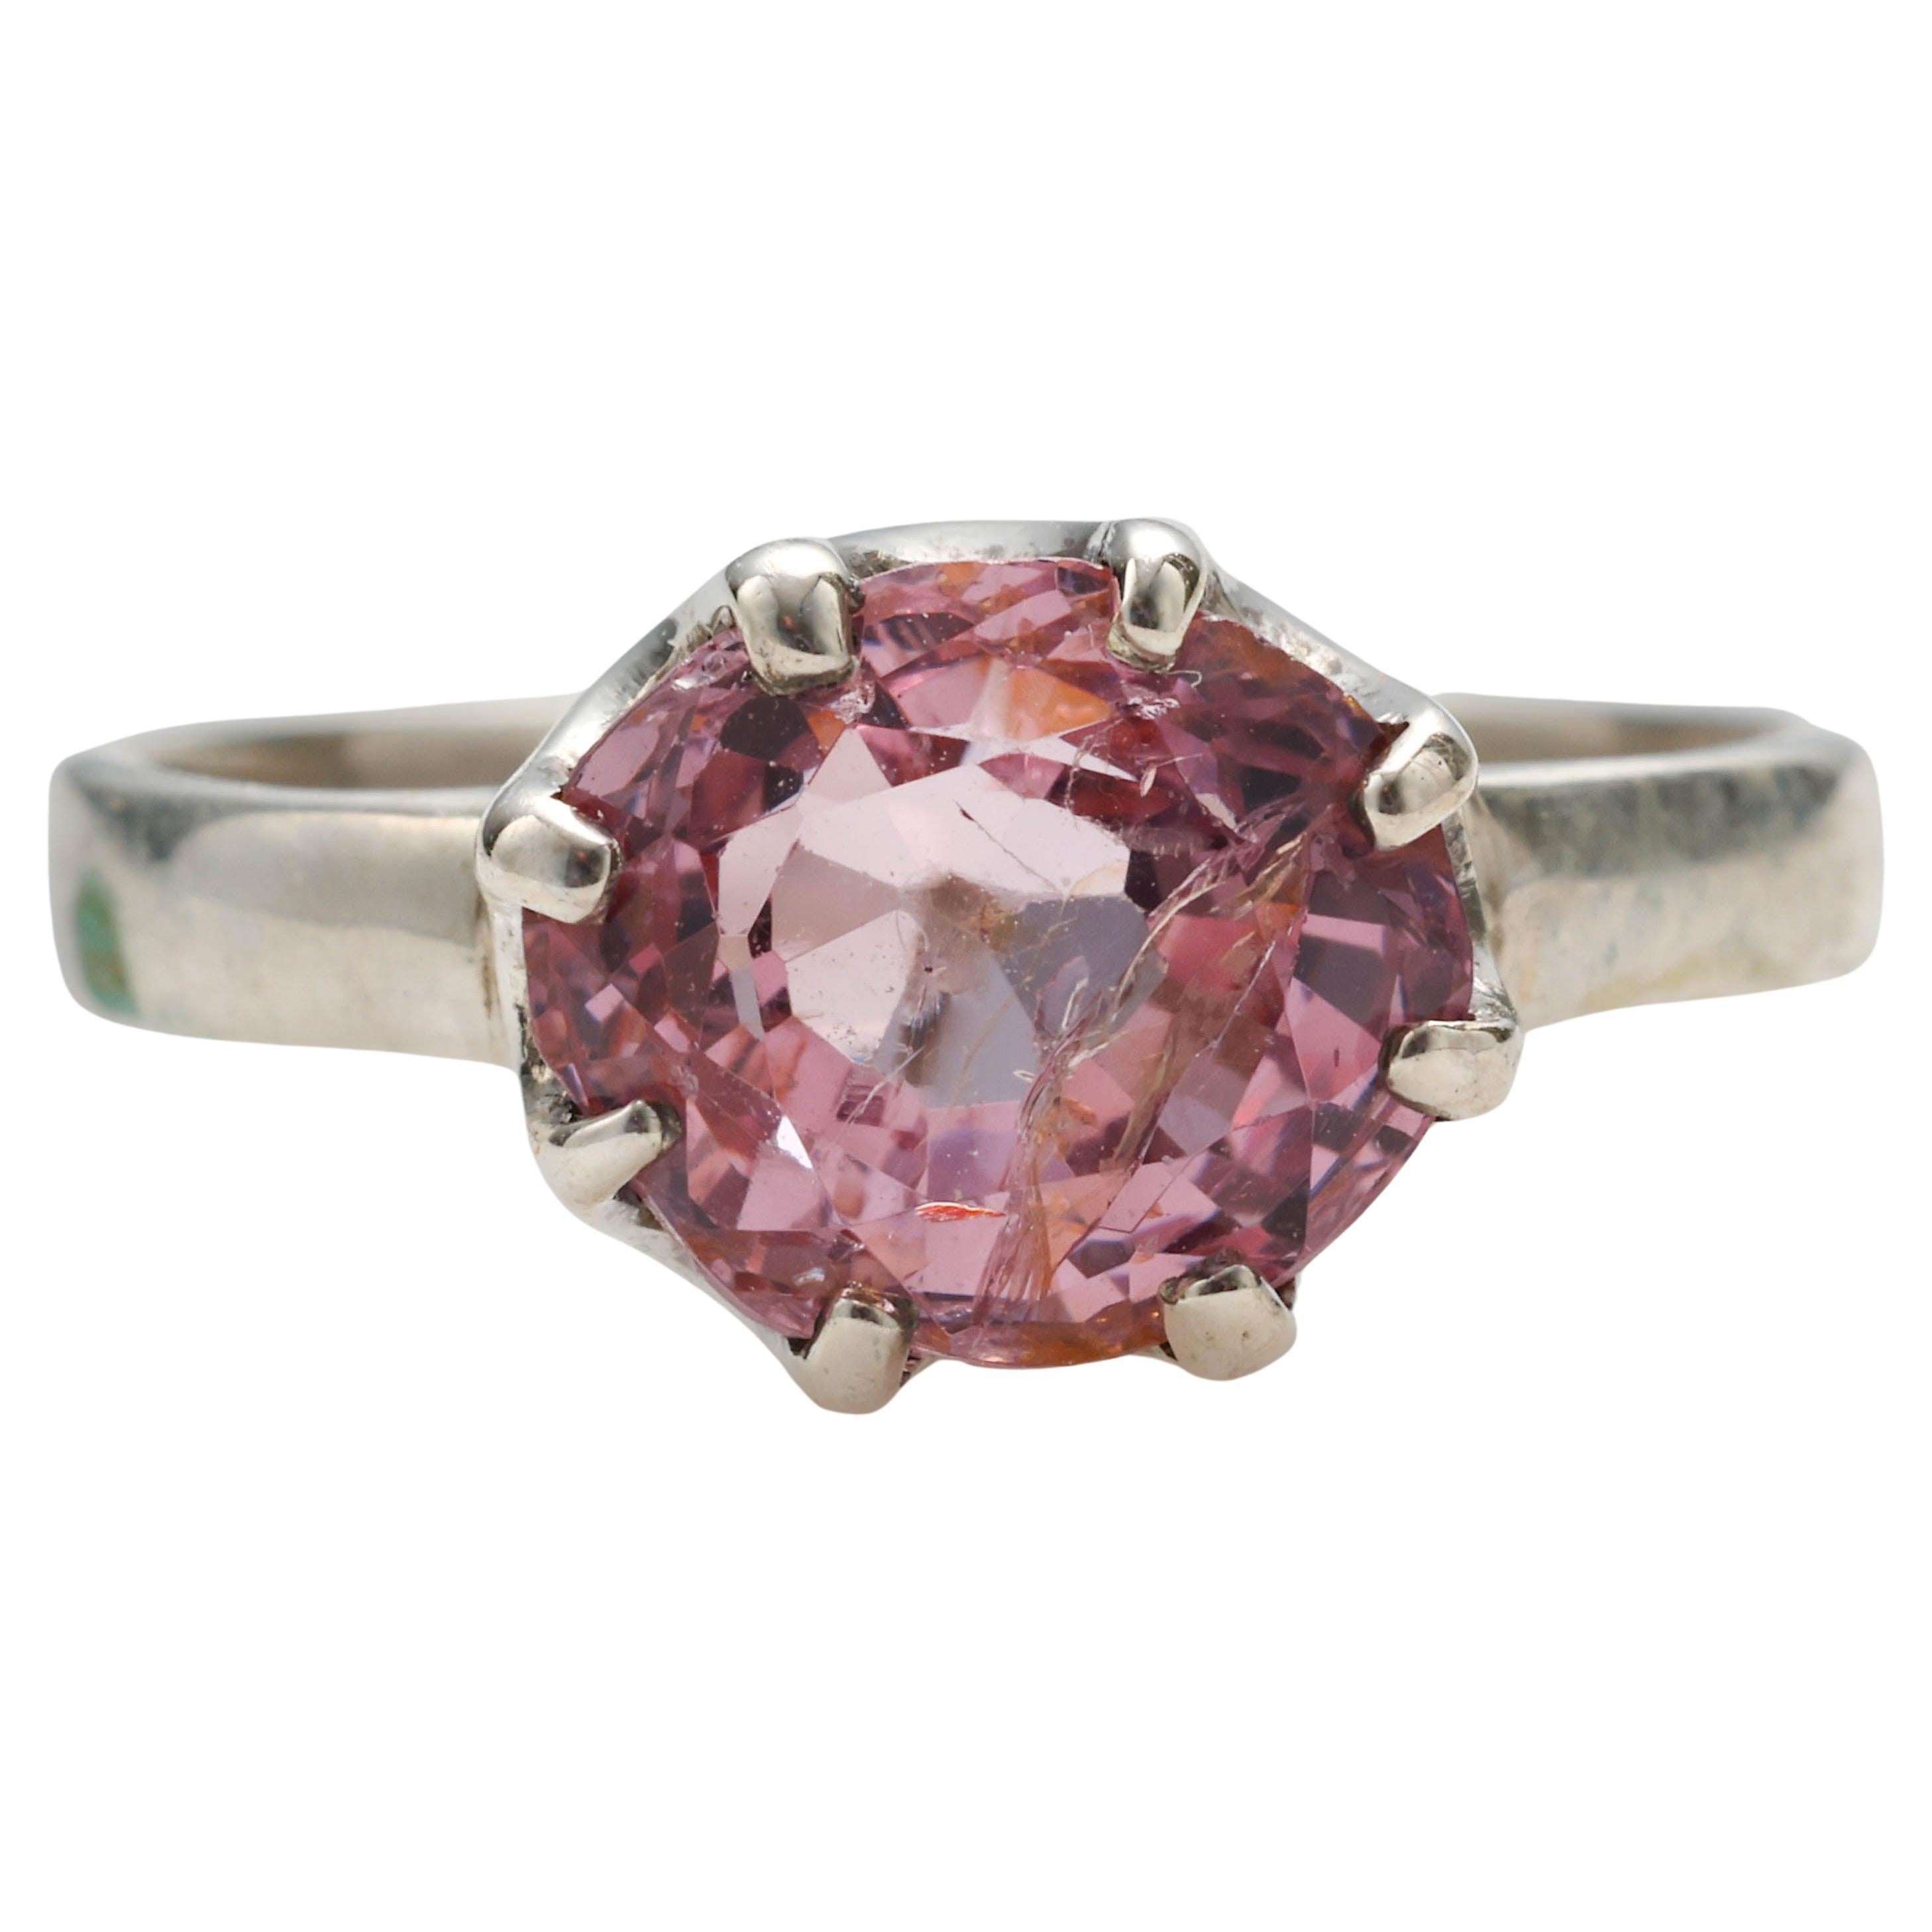 Padparadscha Sapphire-Colored No-Heat Spinel Ring